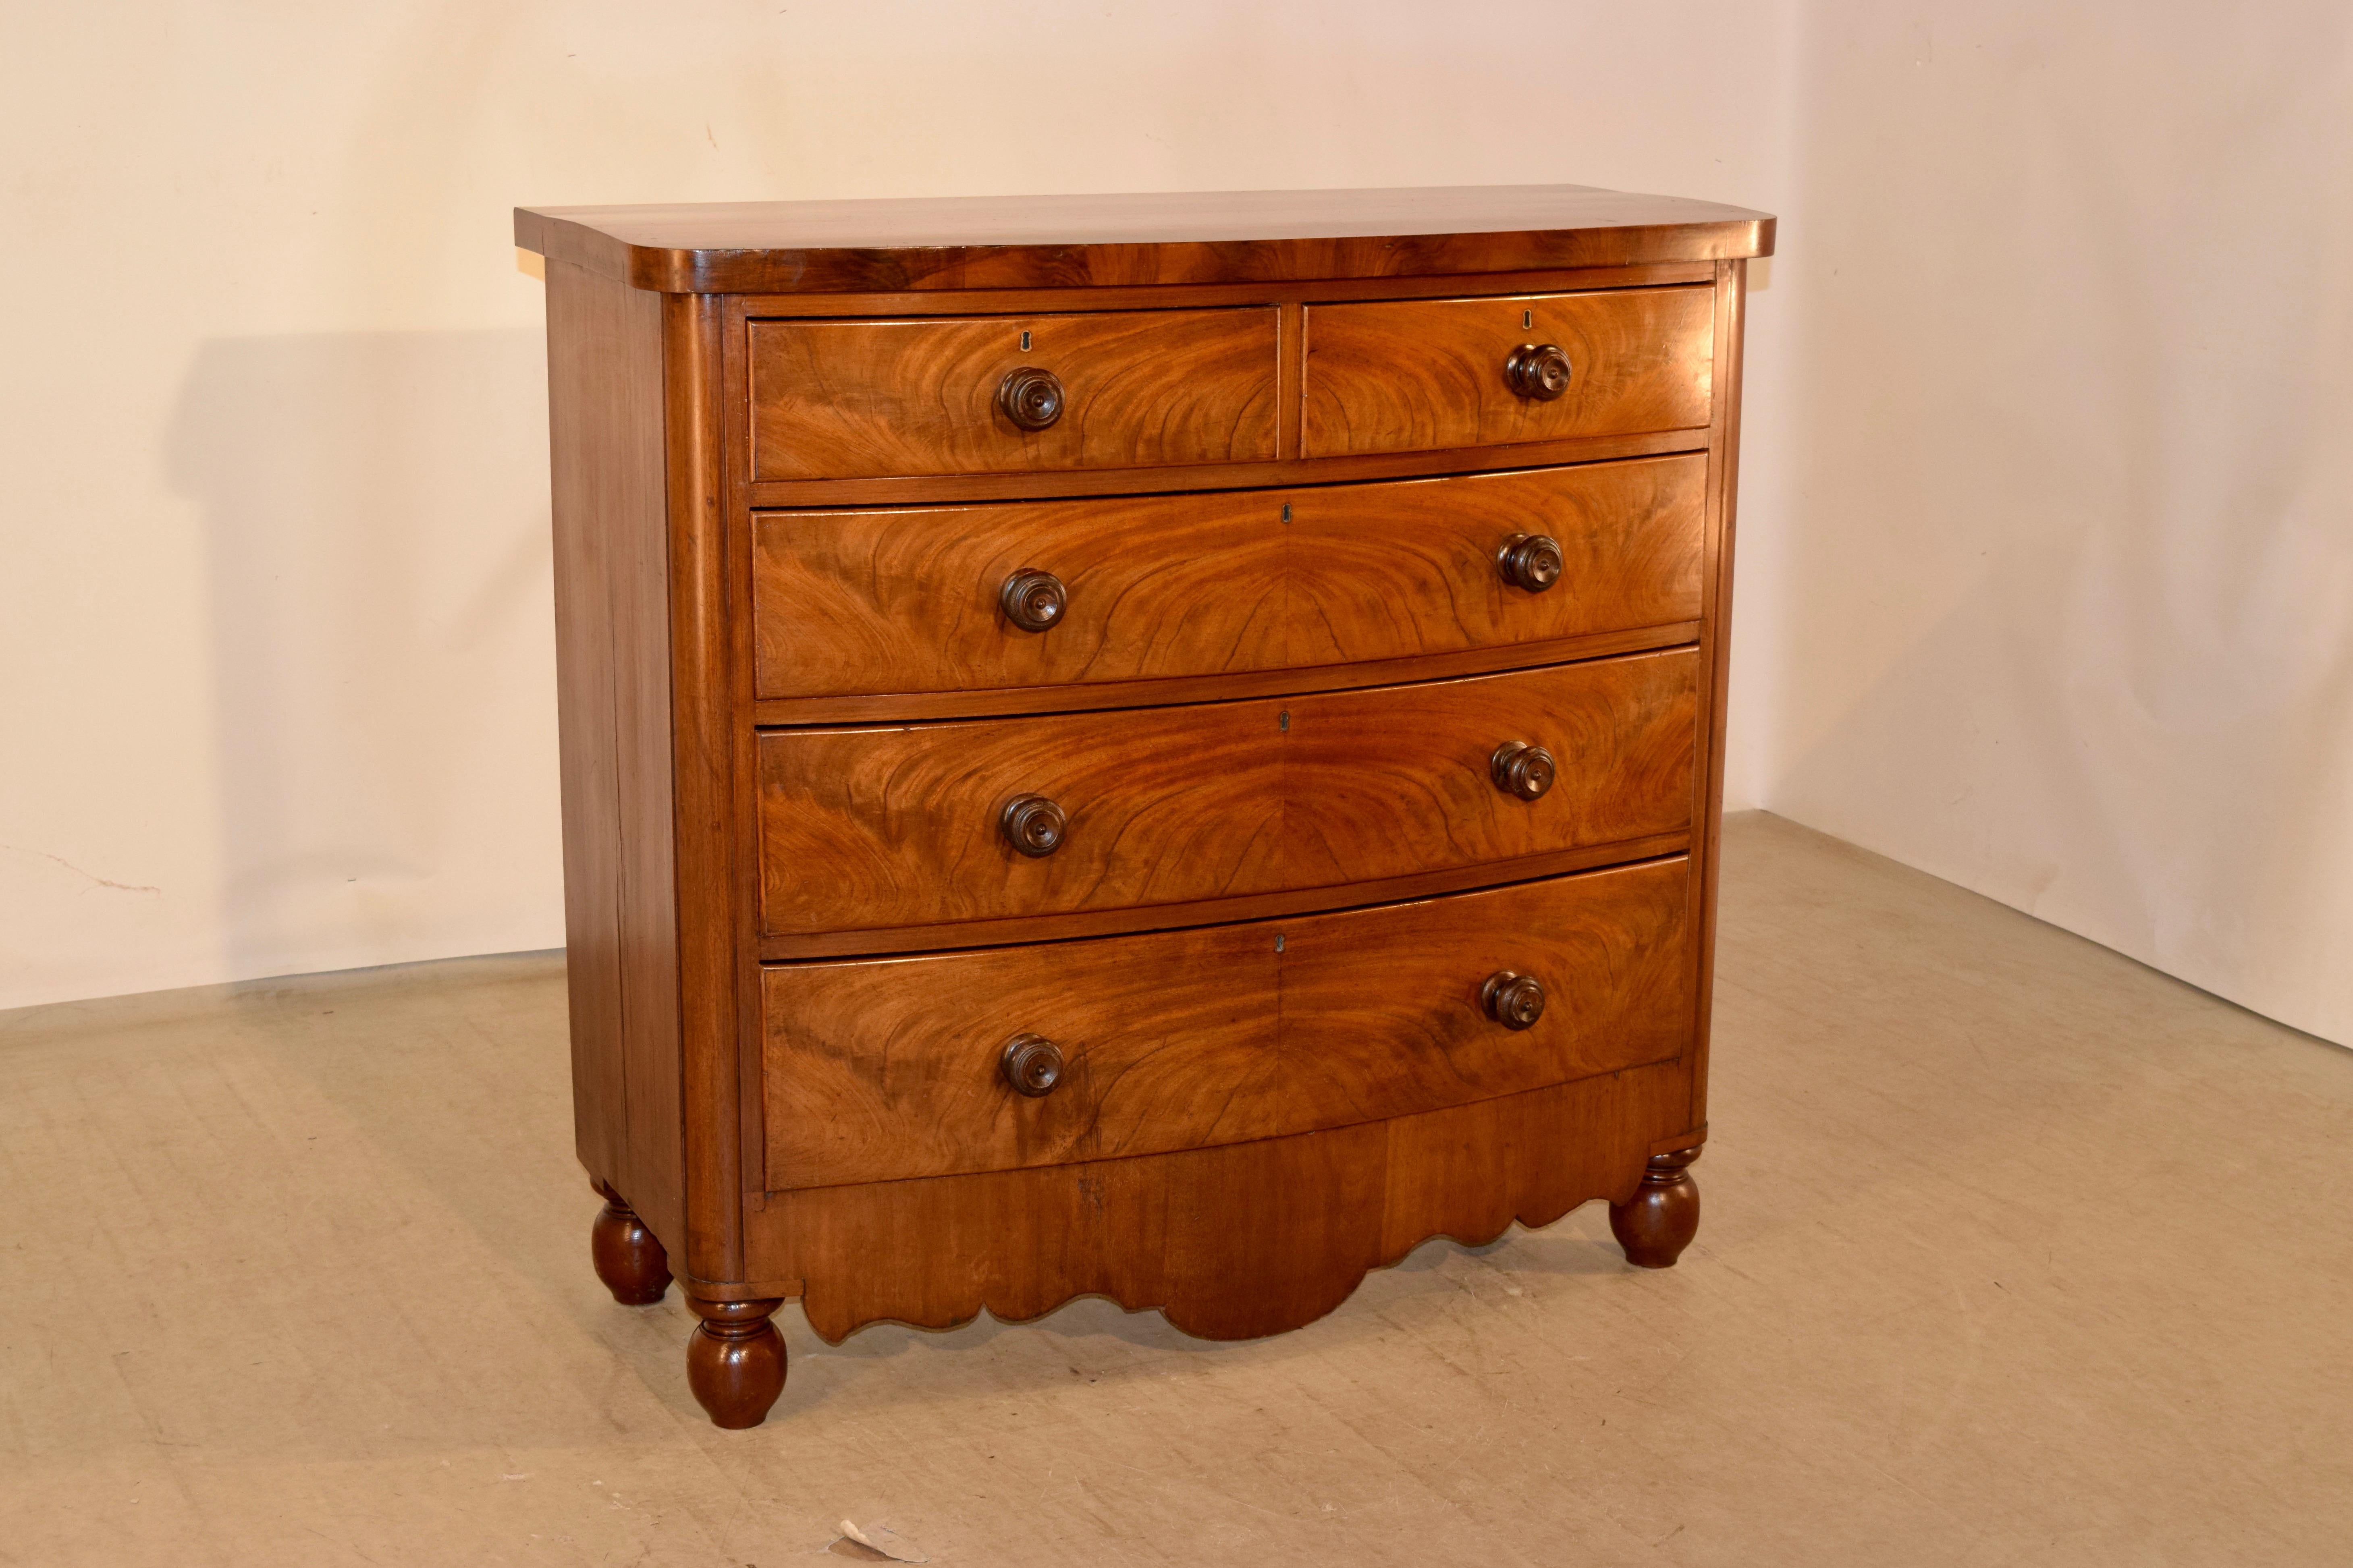 19th century bow front chest from England made from Mahogany. The top is wonderfully grained, and follows down to simple sides and two over three drawer configuration in the front. The drawers have lovely figuring as well, and are over a hand